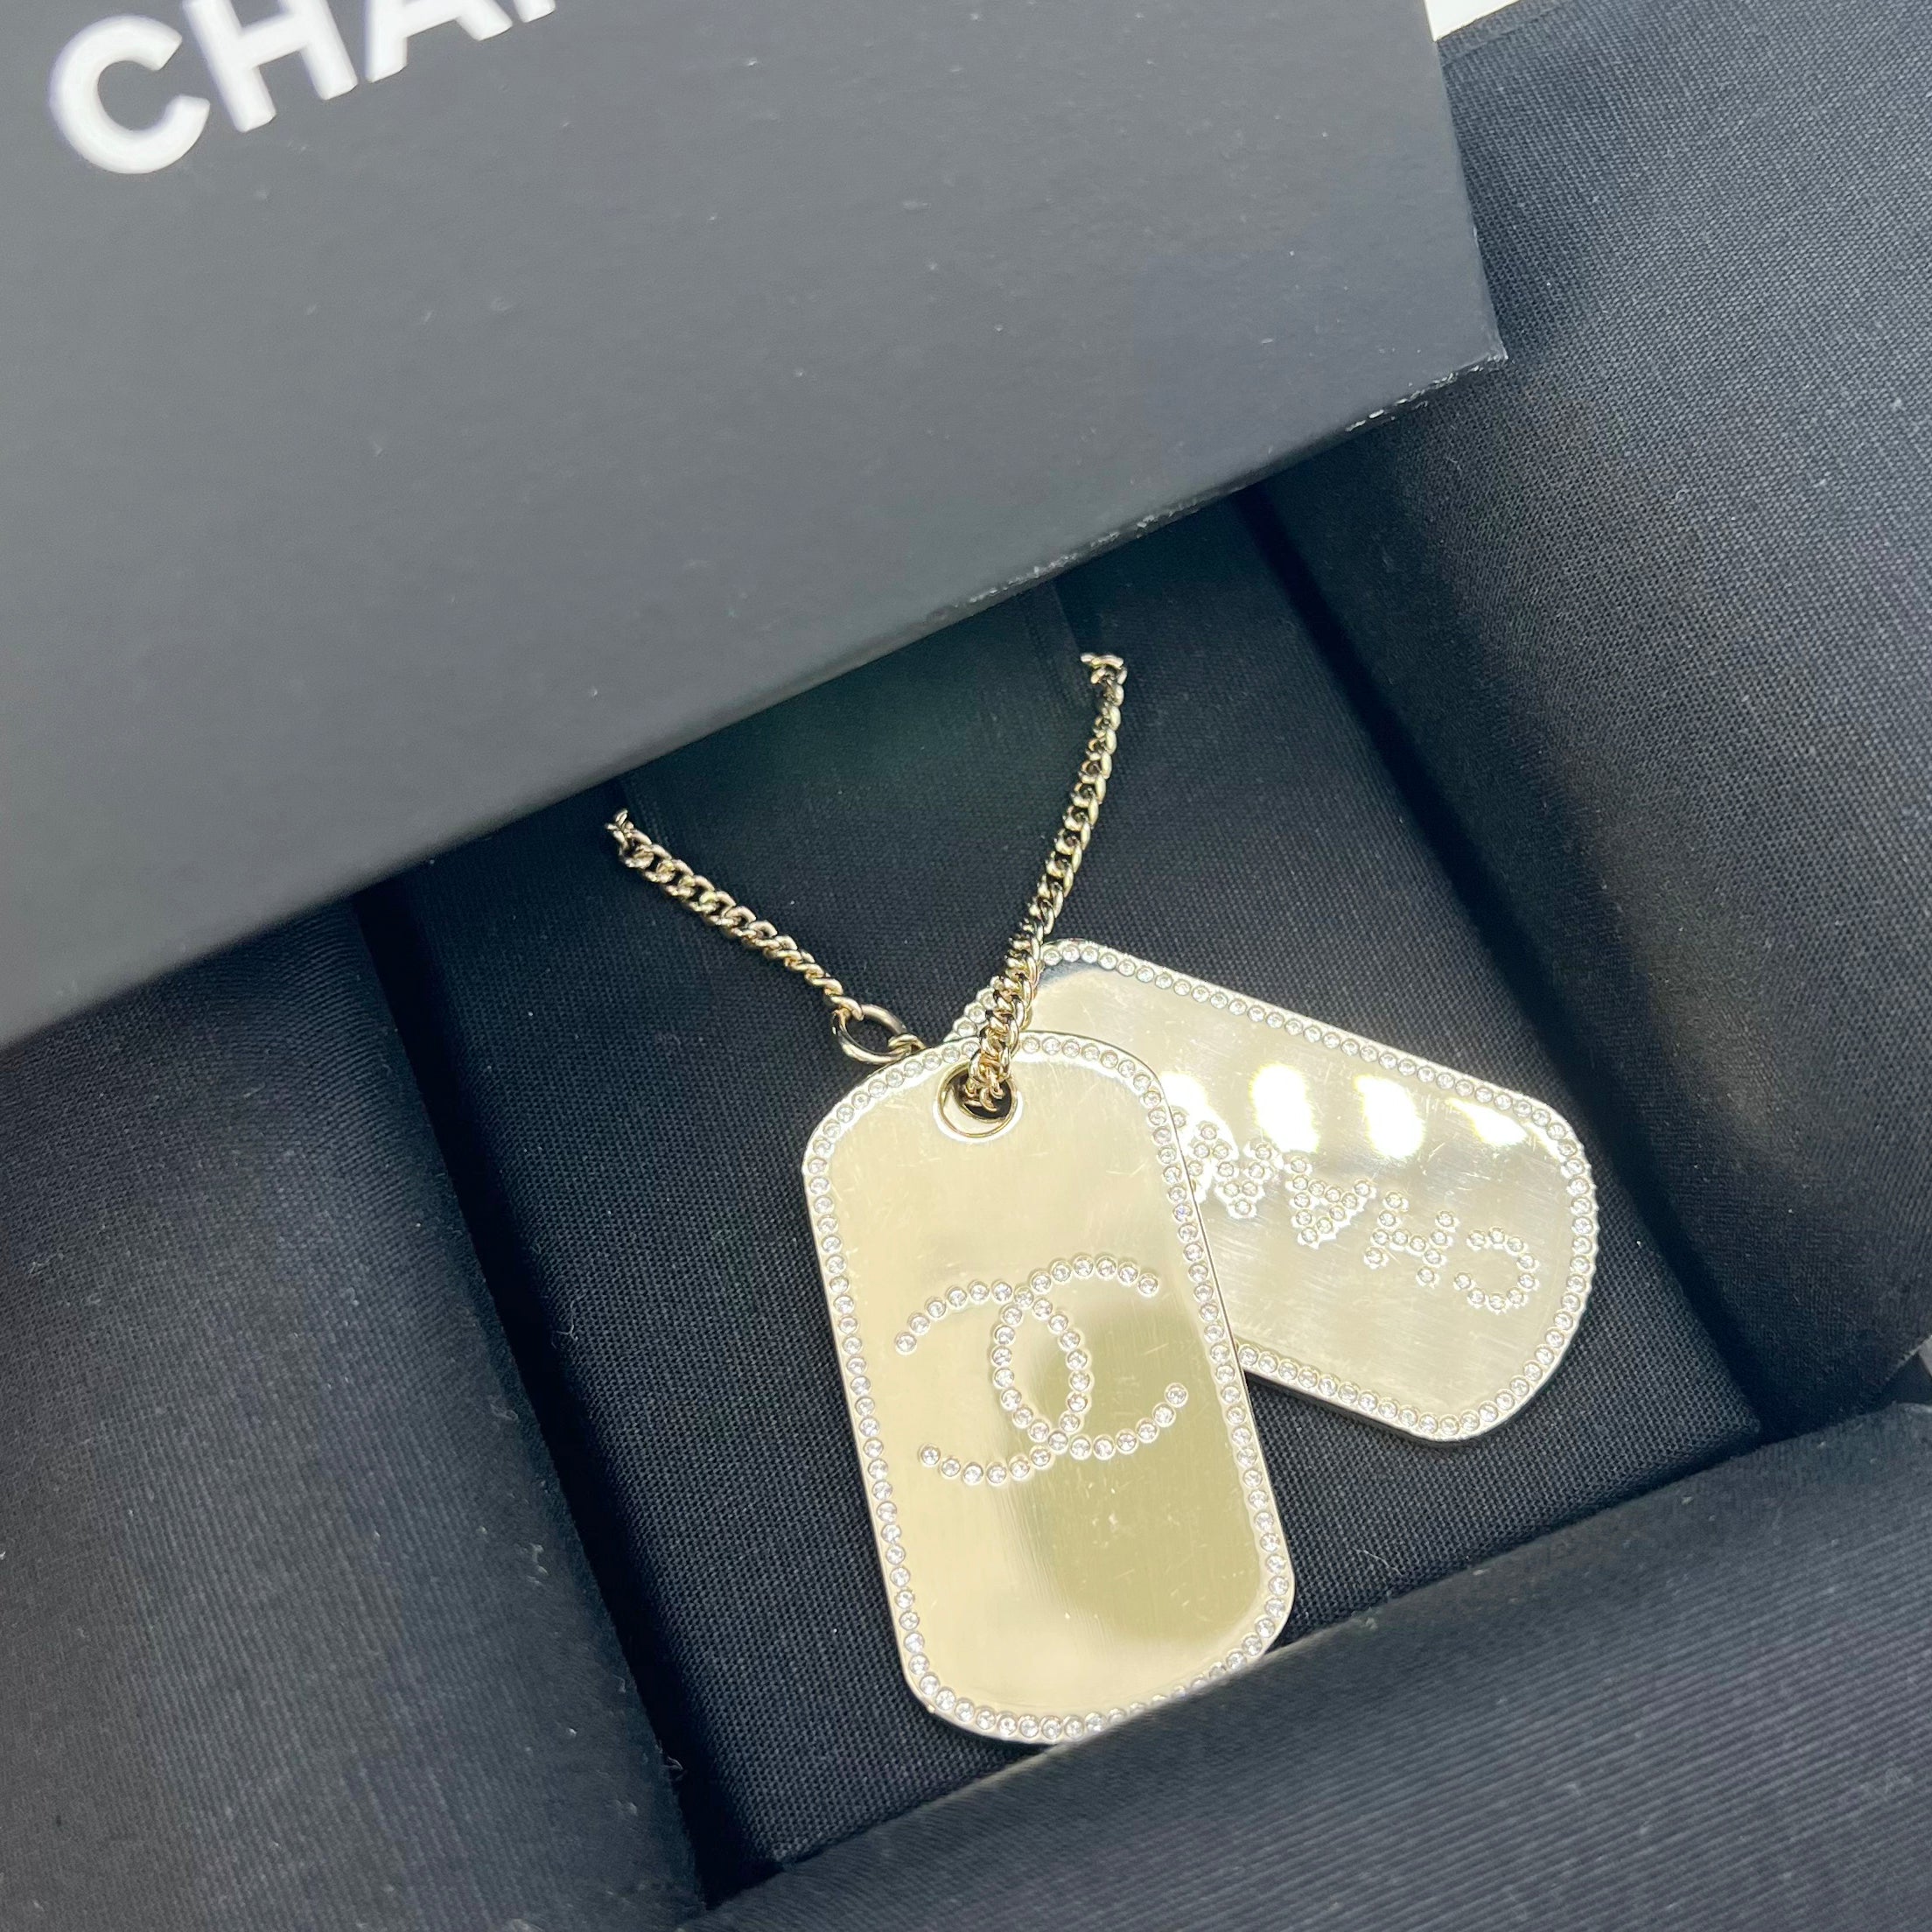 Guaranteed Authentic Chanel Gold Plated Metal with Crystal CC/Chanel Dog Tag Charm Necklace Gold 17”